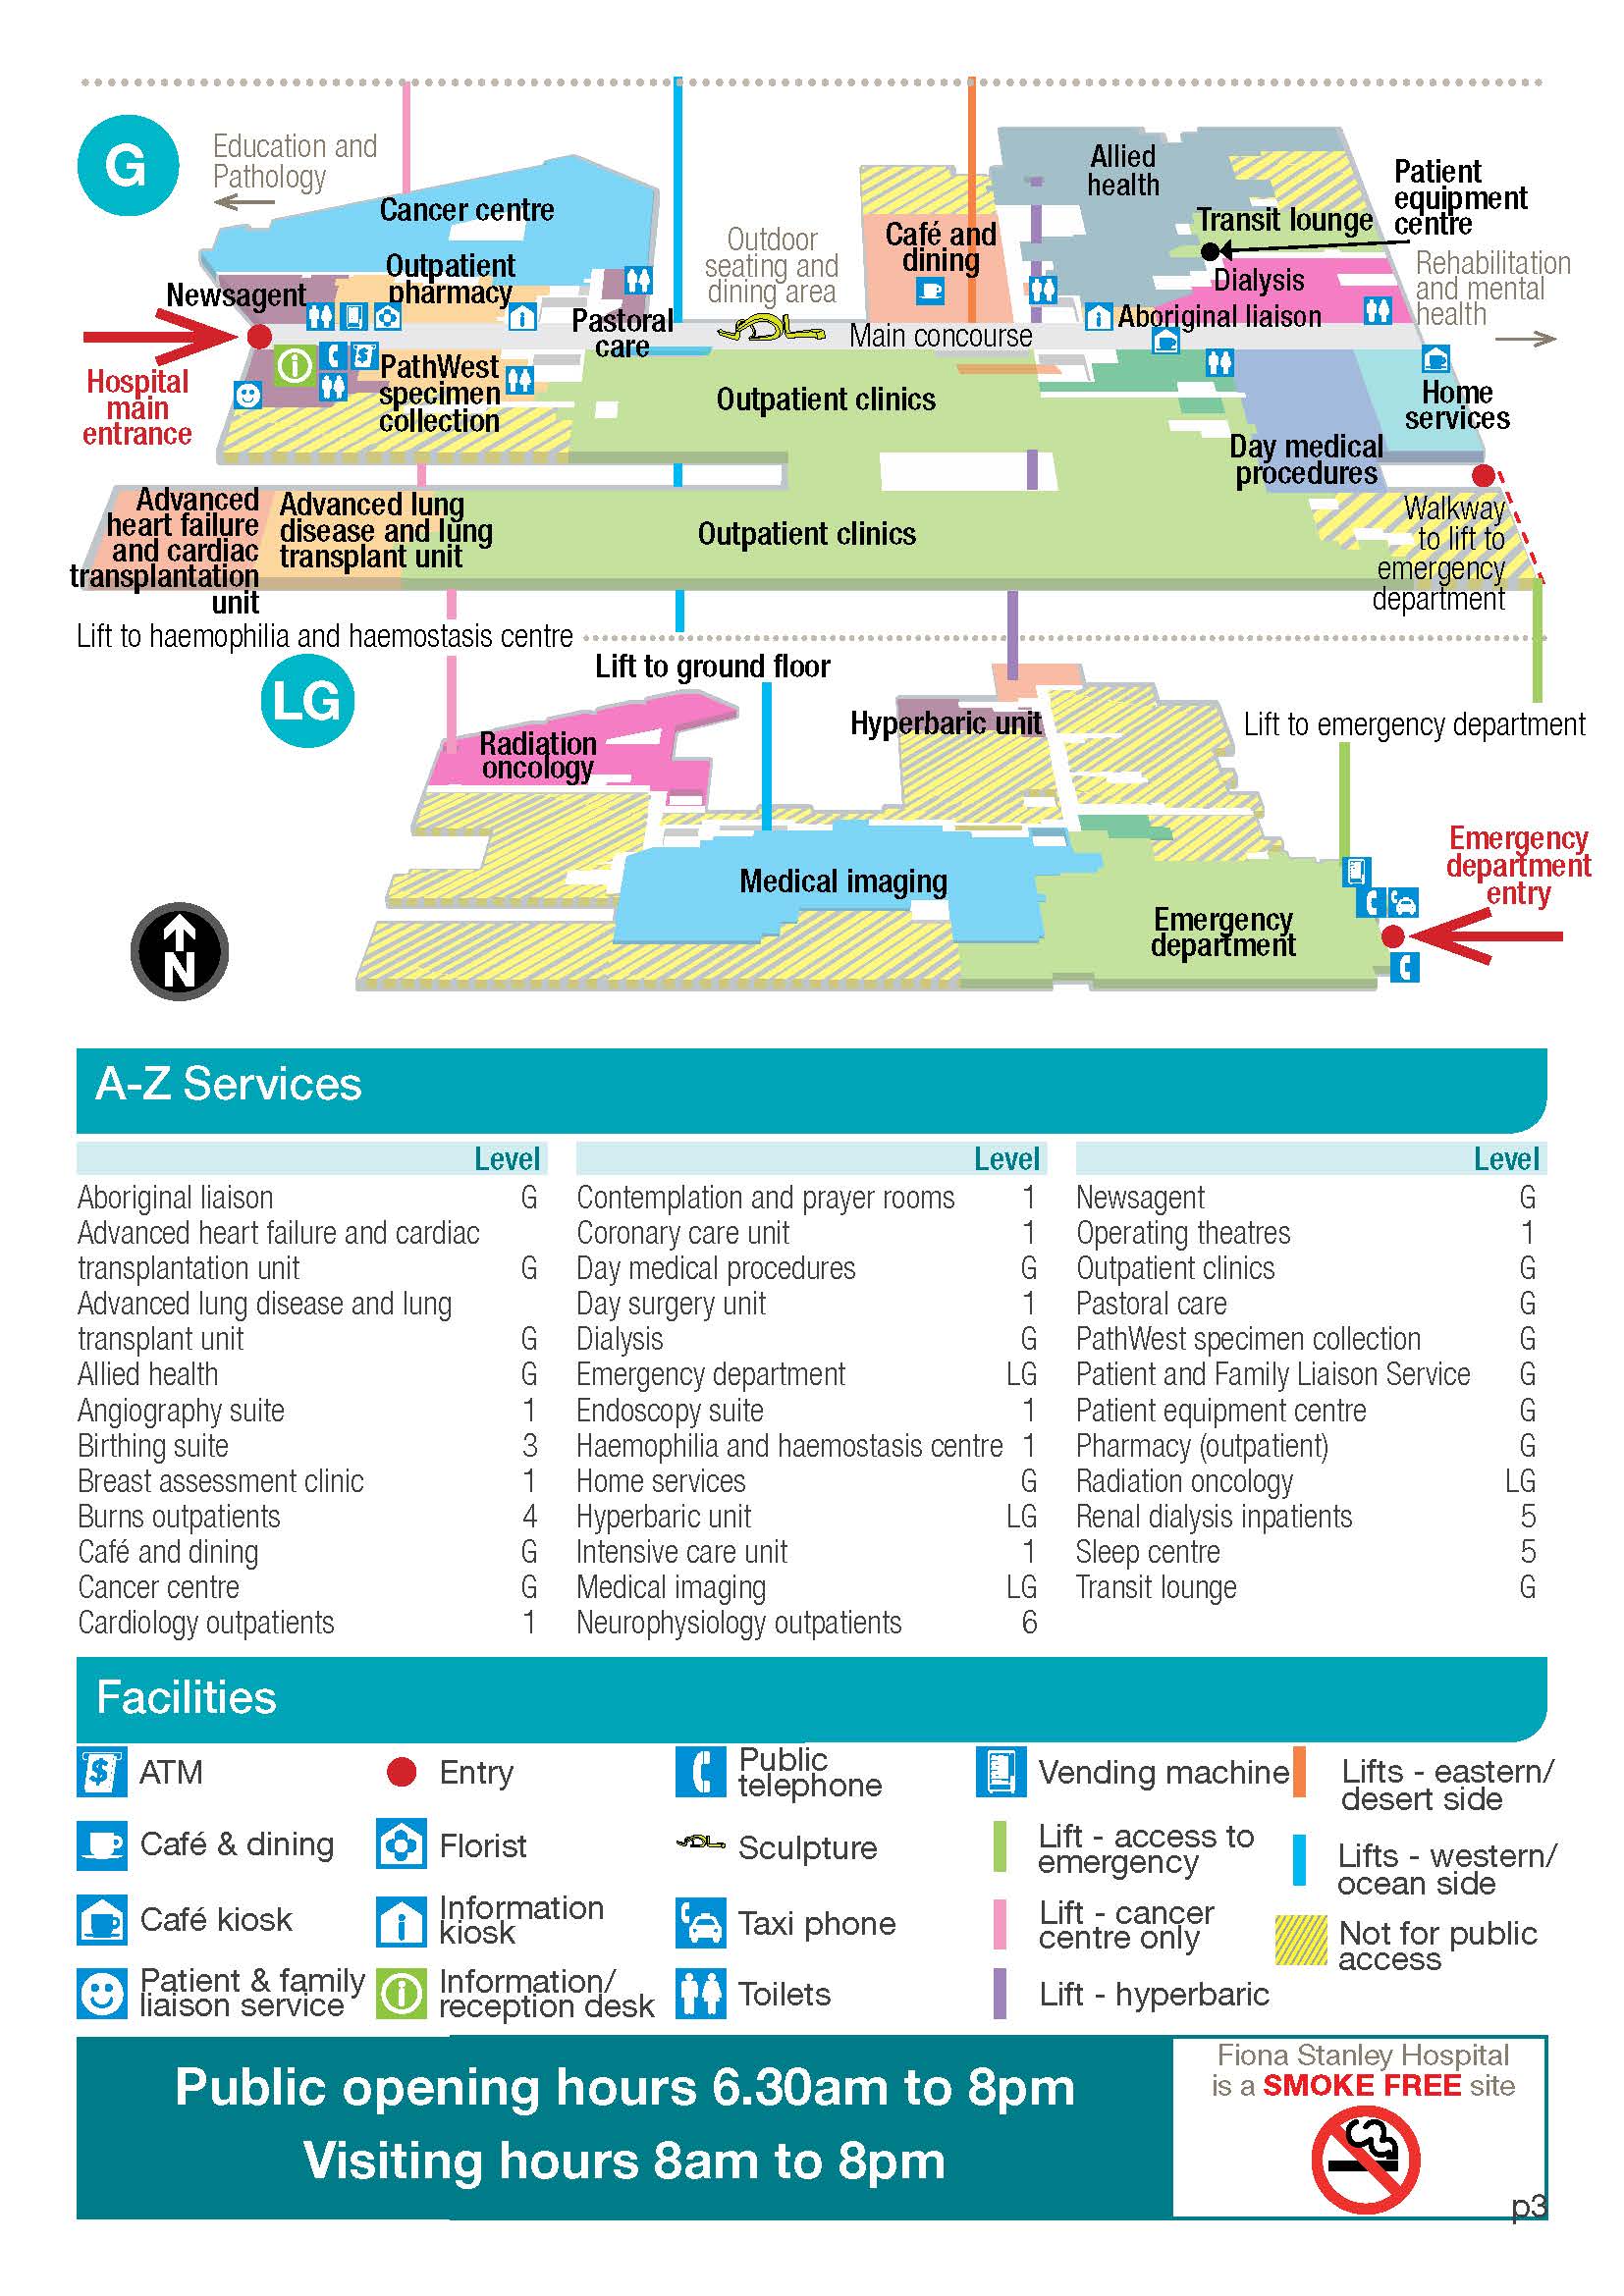 fiona stanley map Fiona Stanley Hospital A To Z Services Map fiona stanley map